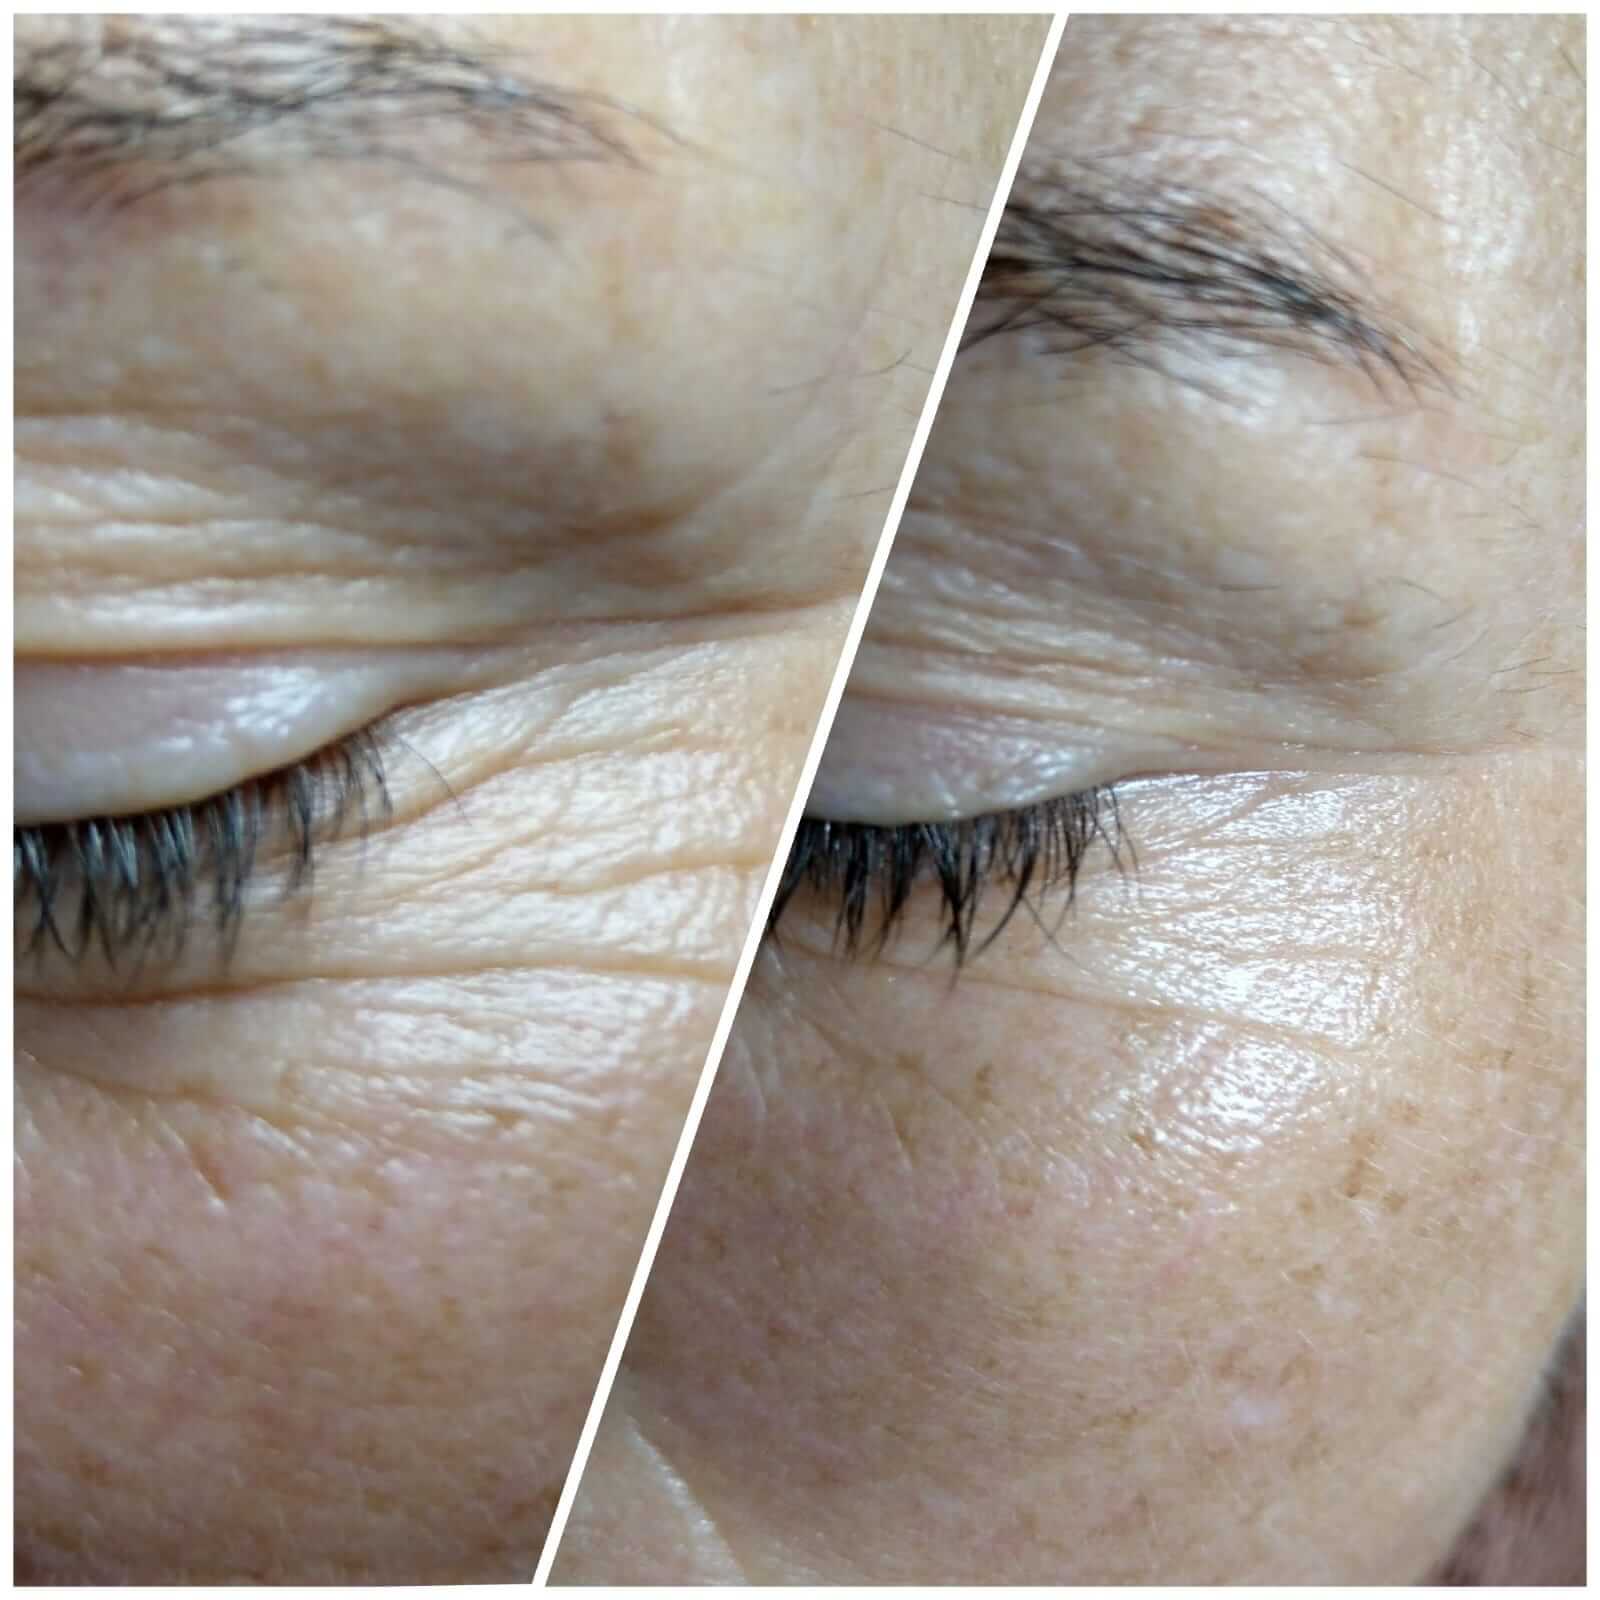 Before and after eye treatment